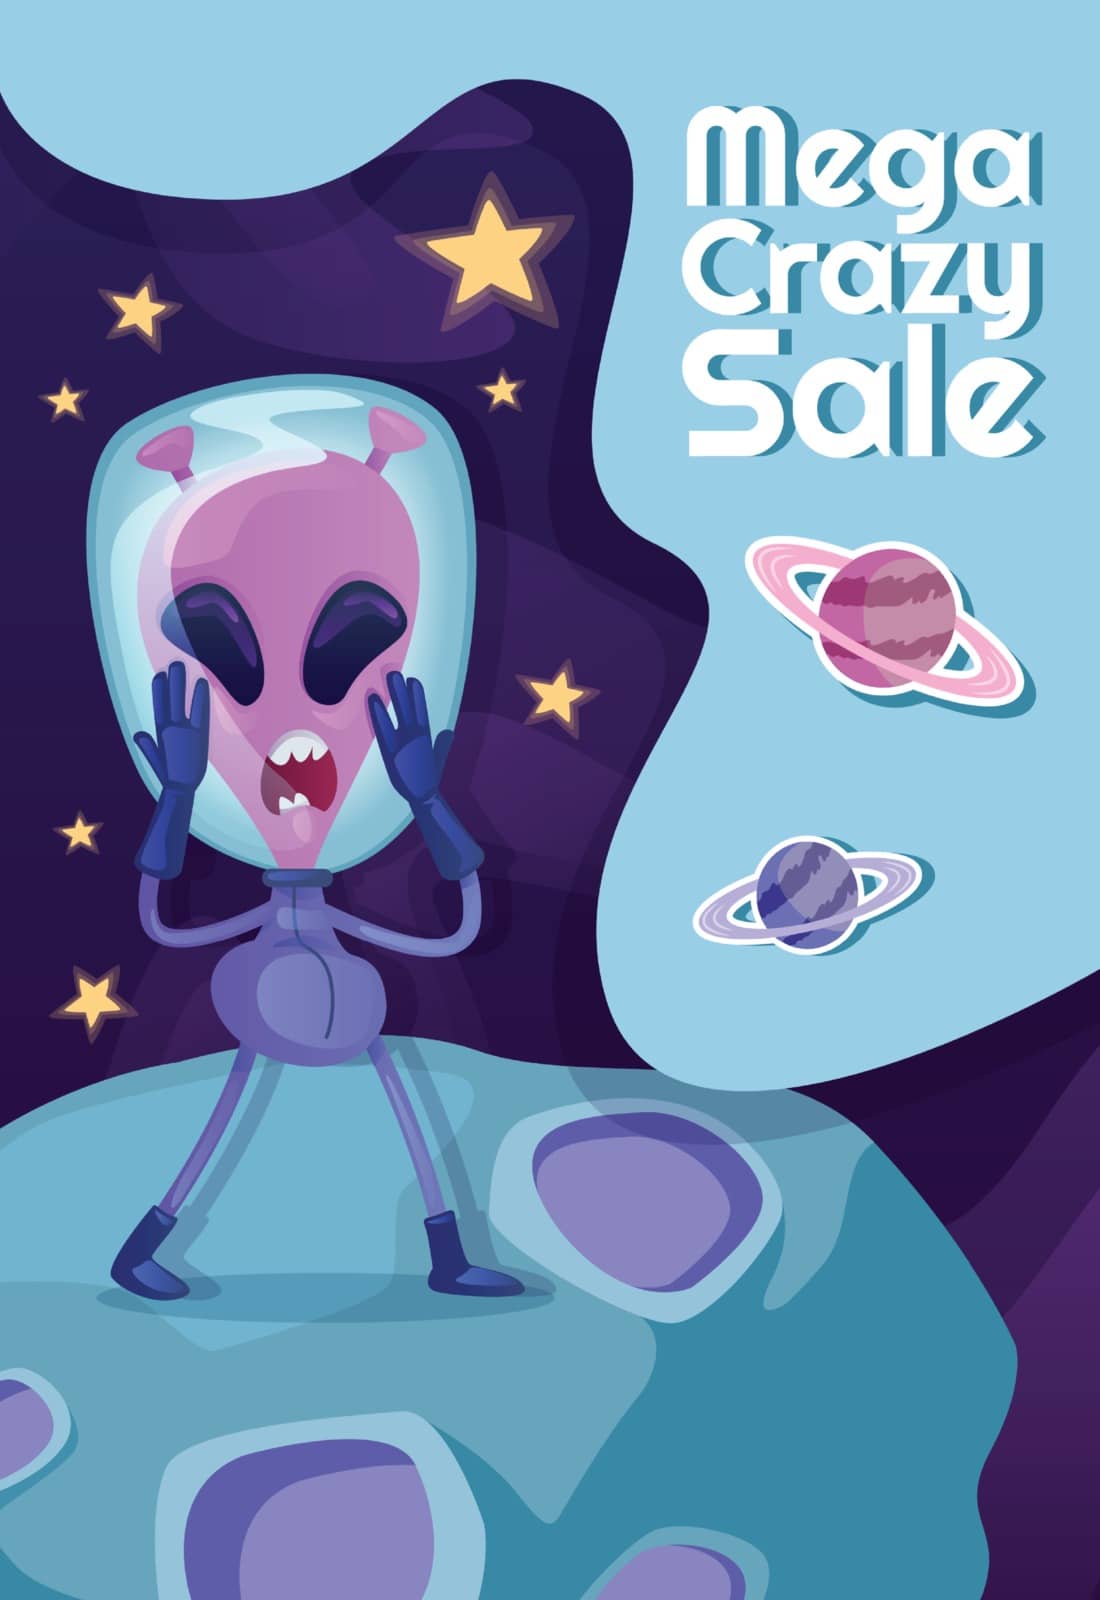 Mega crazy sale poster flat vector template. Emotional martian, amazed extraterrestrial. Brochure, booklet one page concept design with cartoon characters. Discount advertising flyer, leaflet by ntl